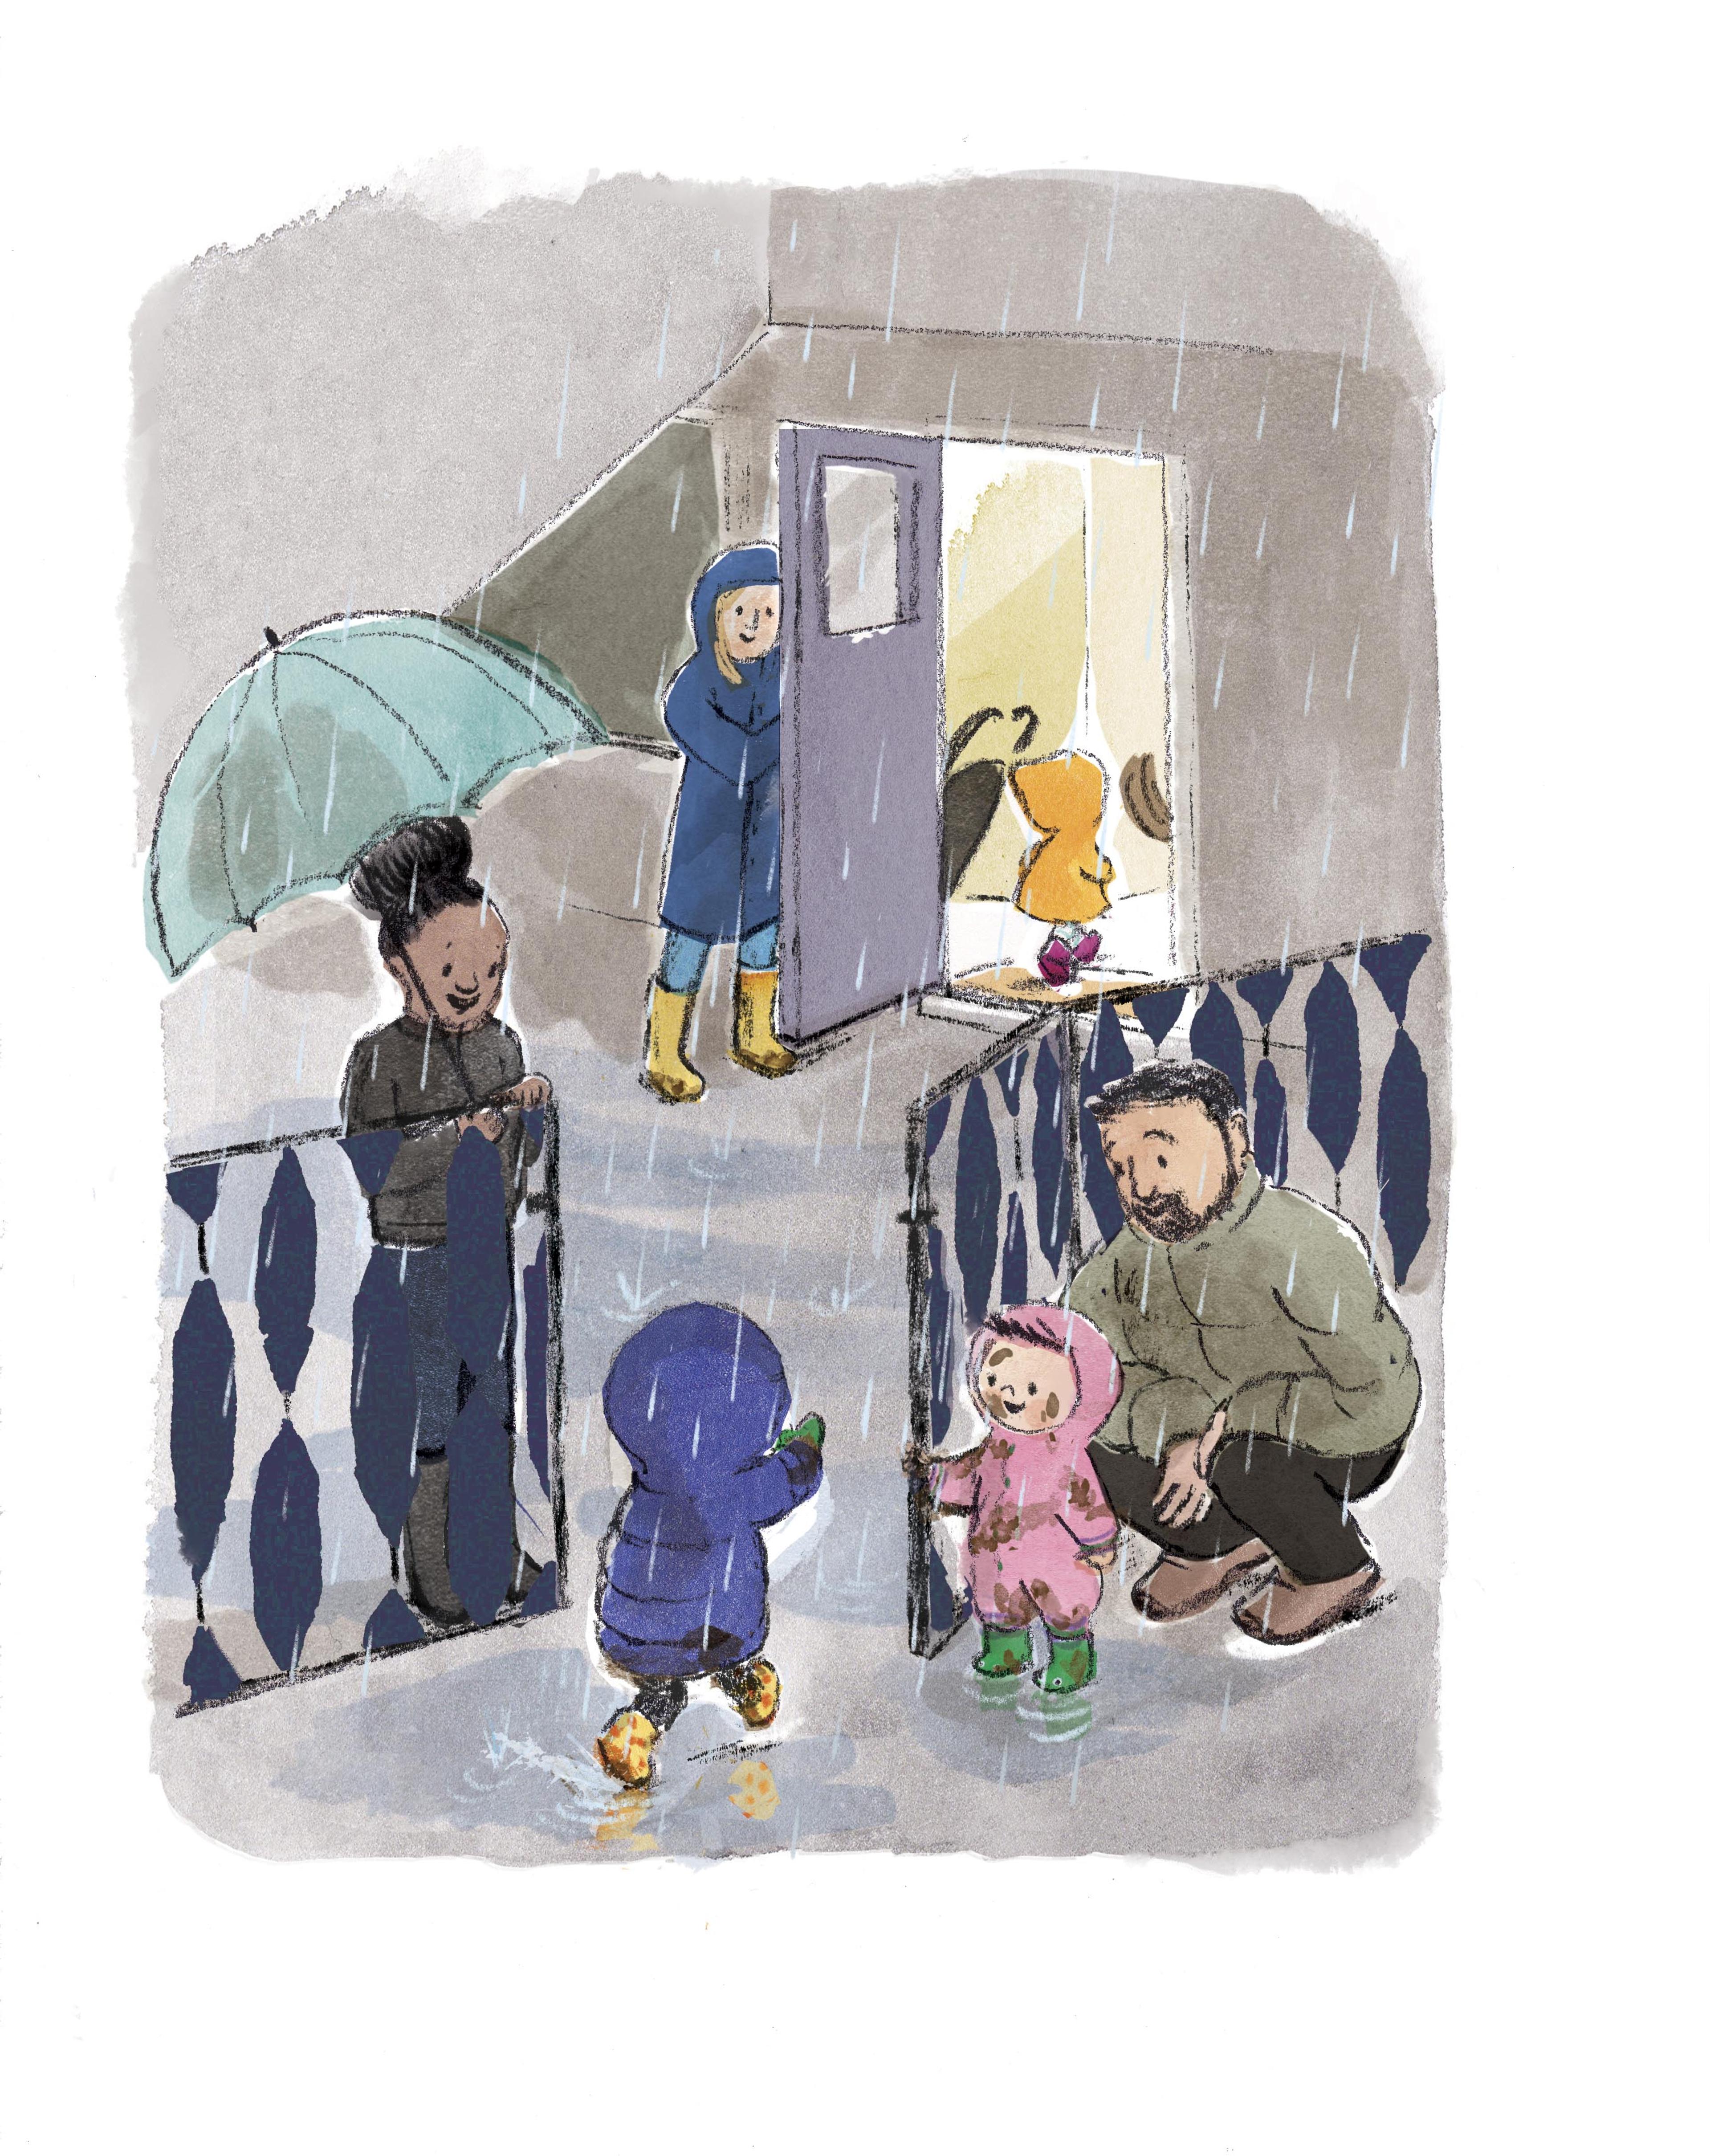 Illustration of three children and three adults in the rain, they are arriving at a building.